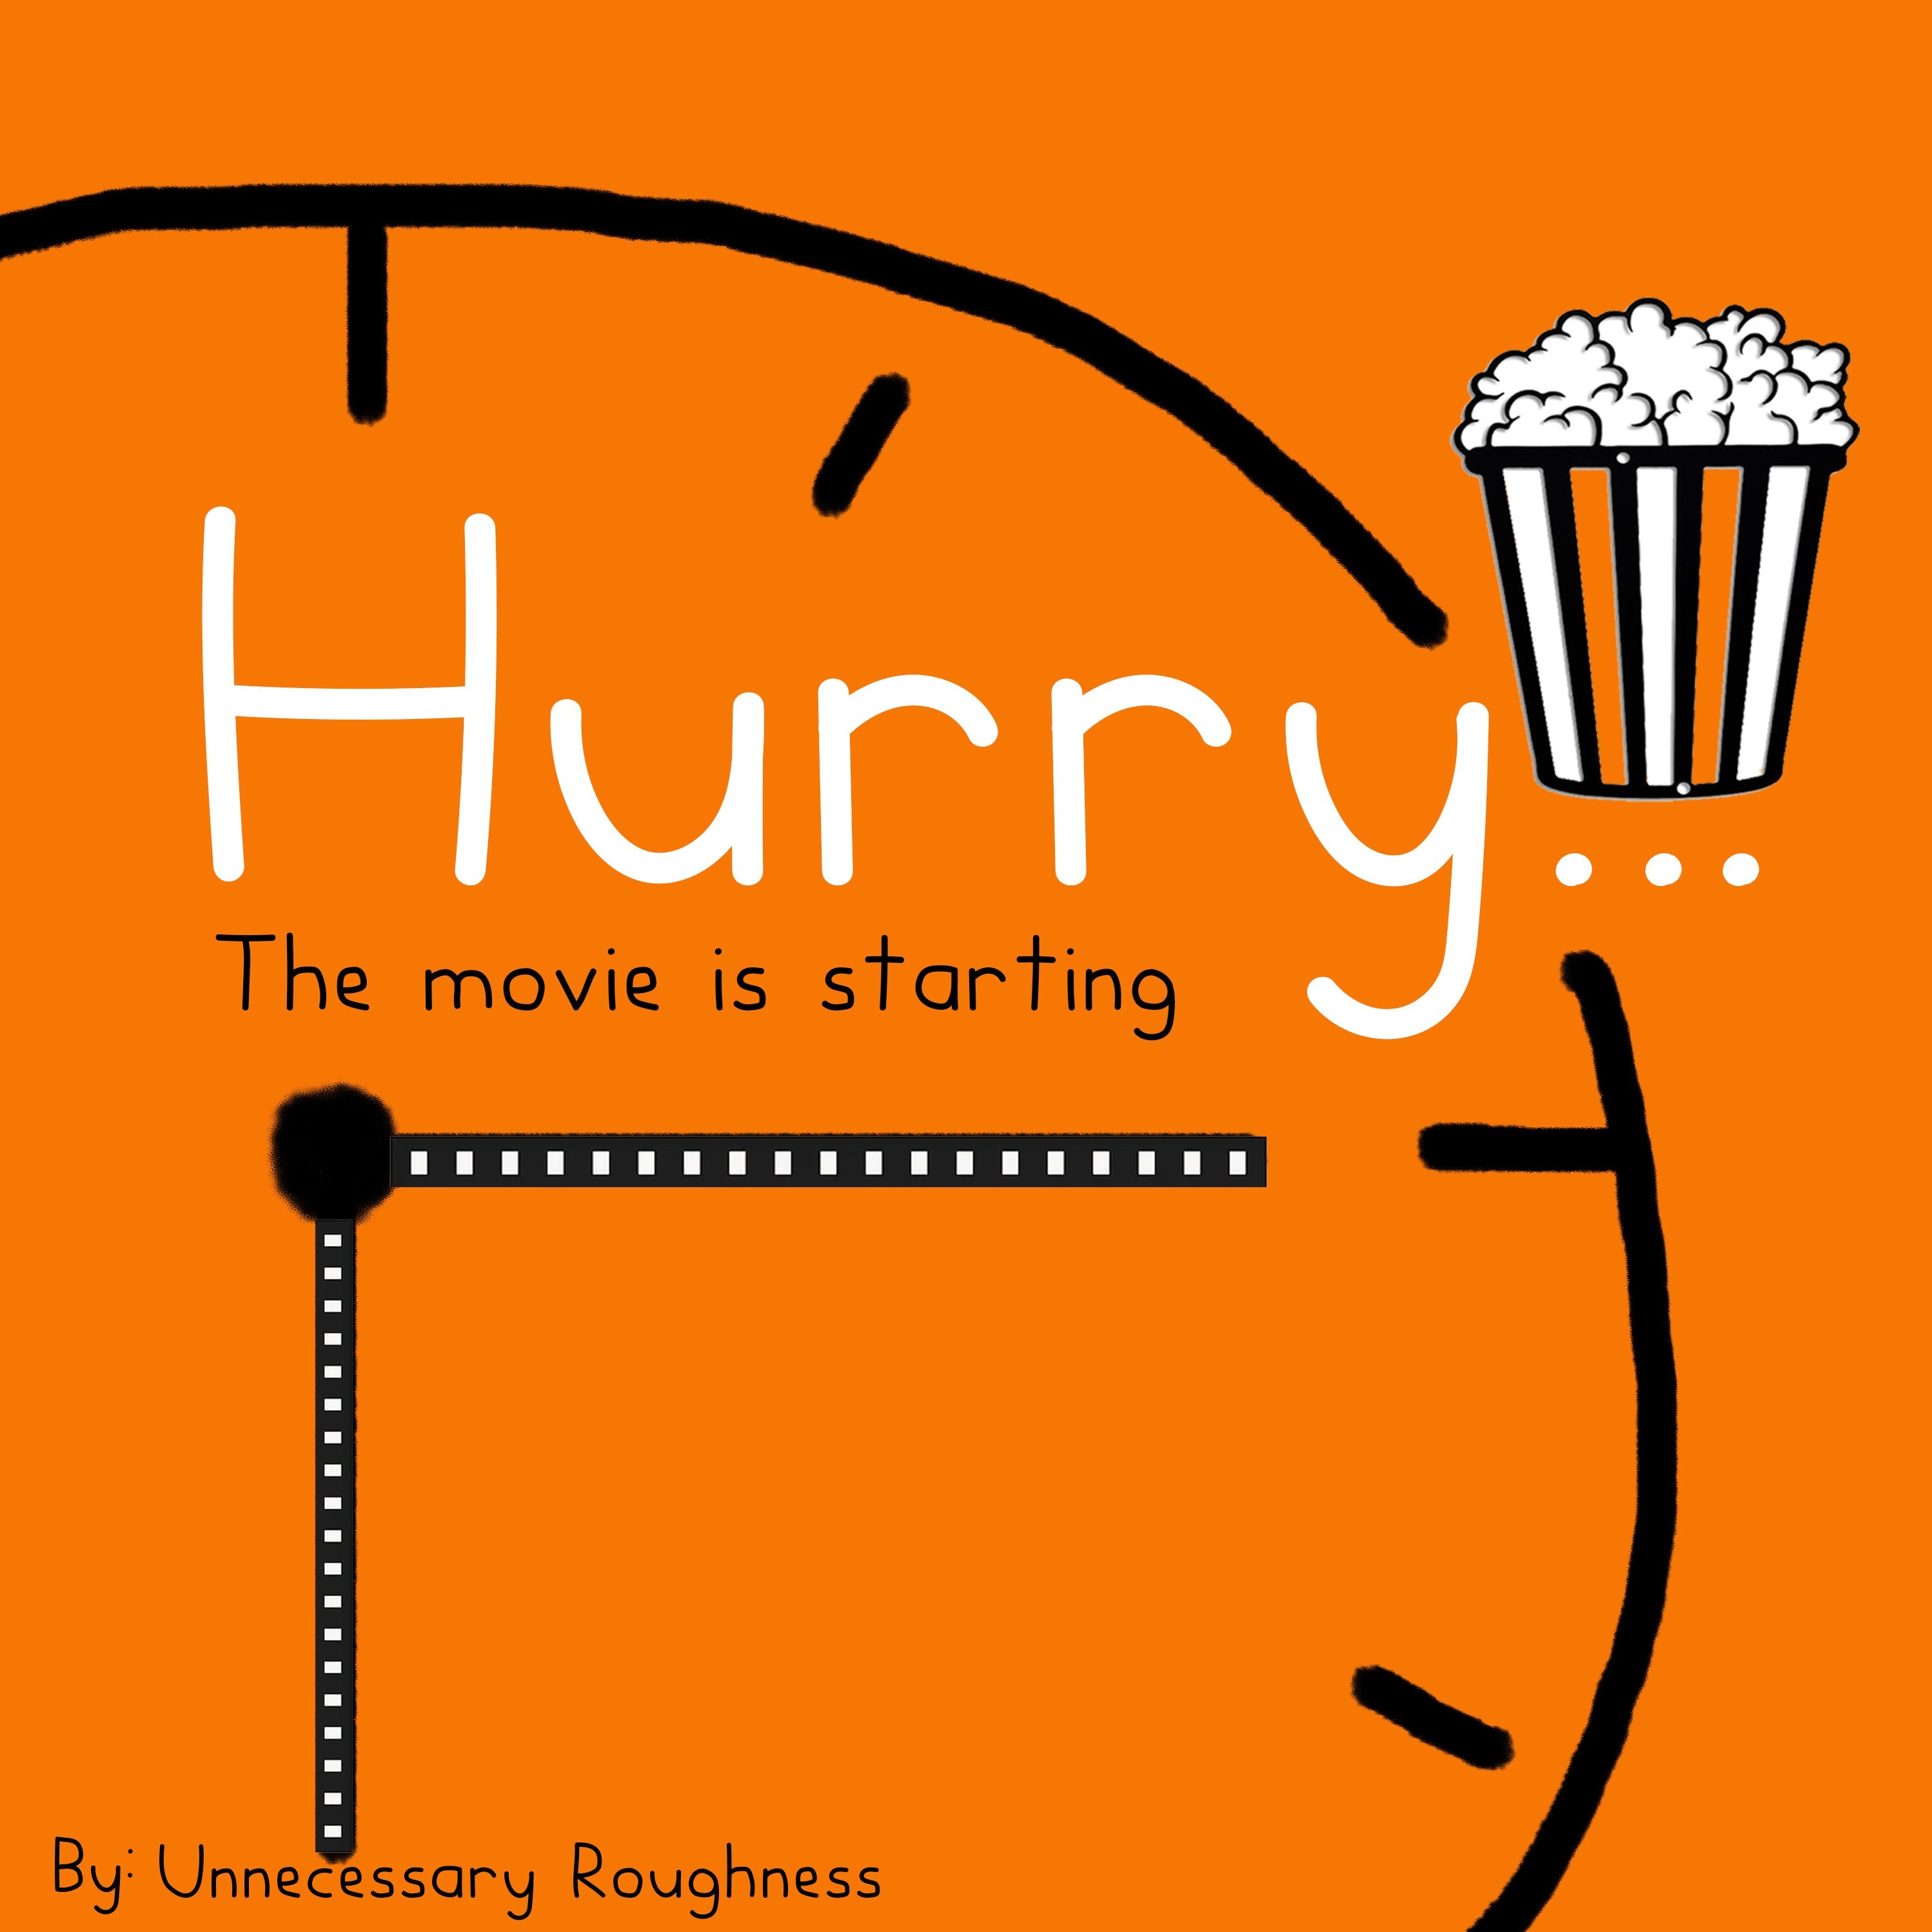 Hurry!!! The movie is starting